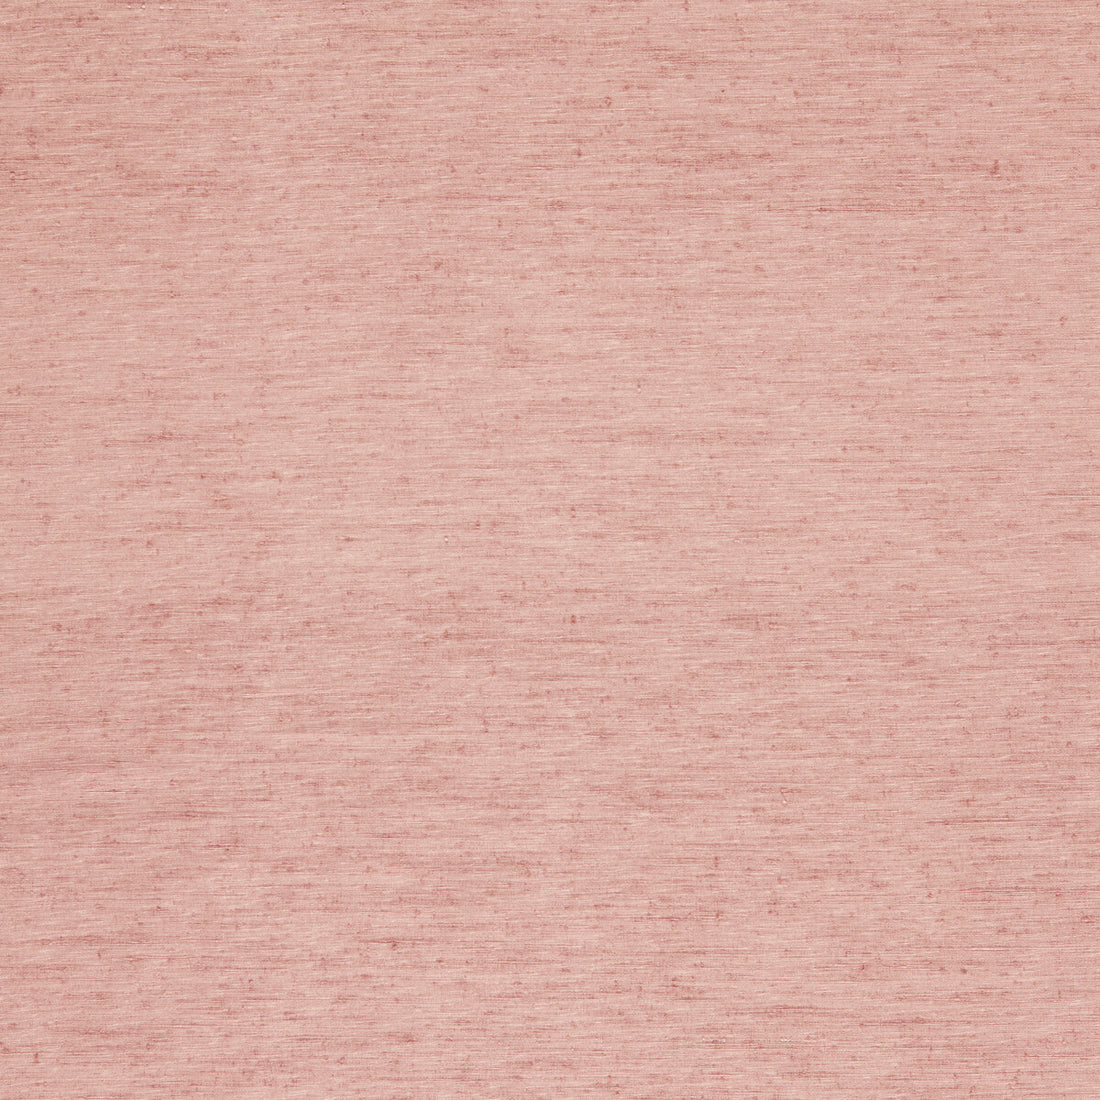 Ravello fabric in blush color - pattern F1608/04.CAC.0 - by Clarke And Clarke in the Ravello By Studio G For C&amp;C collection